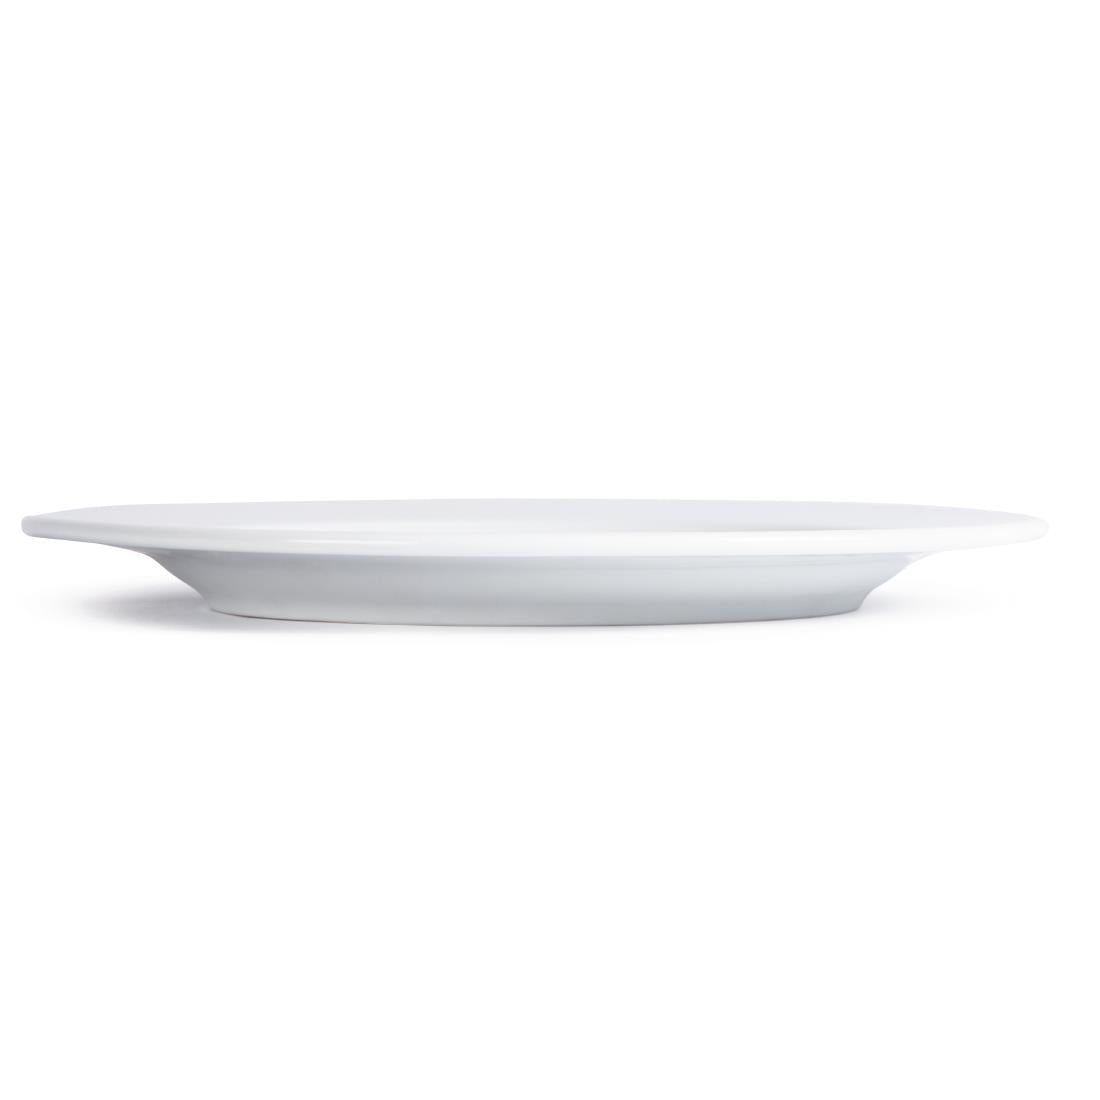 CG009 Royal Porcelain Classic White Wide Rim Plates 260mm (Pack of 12)